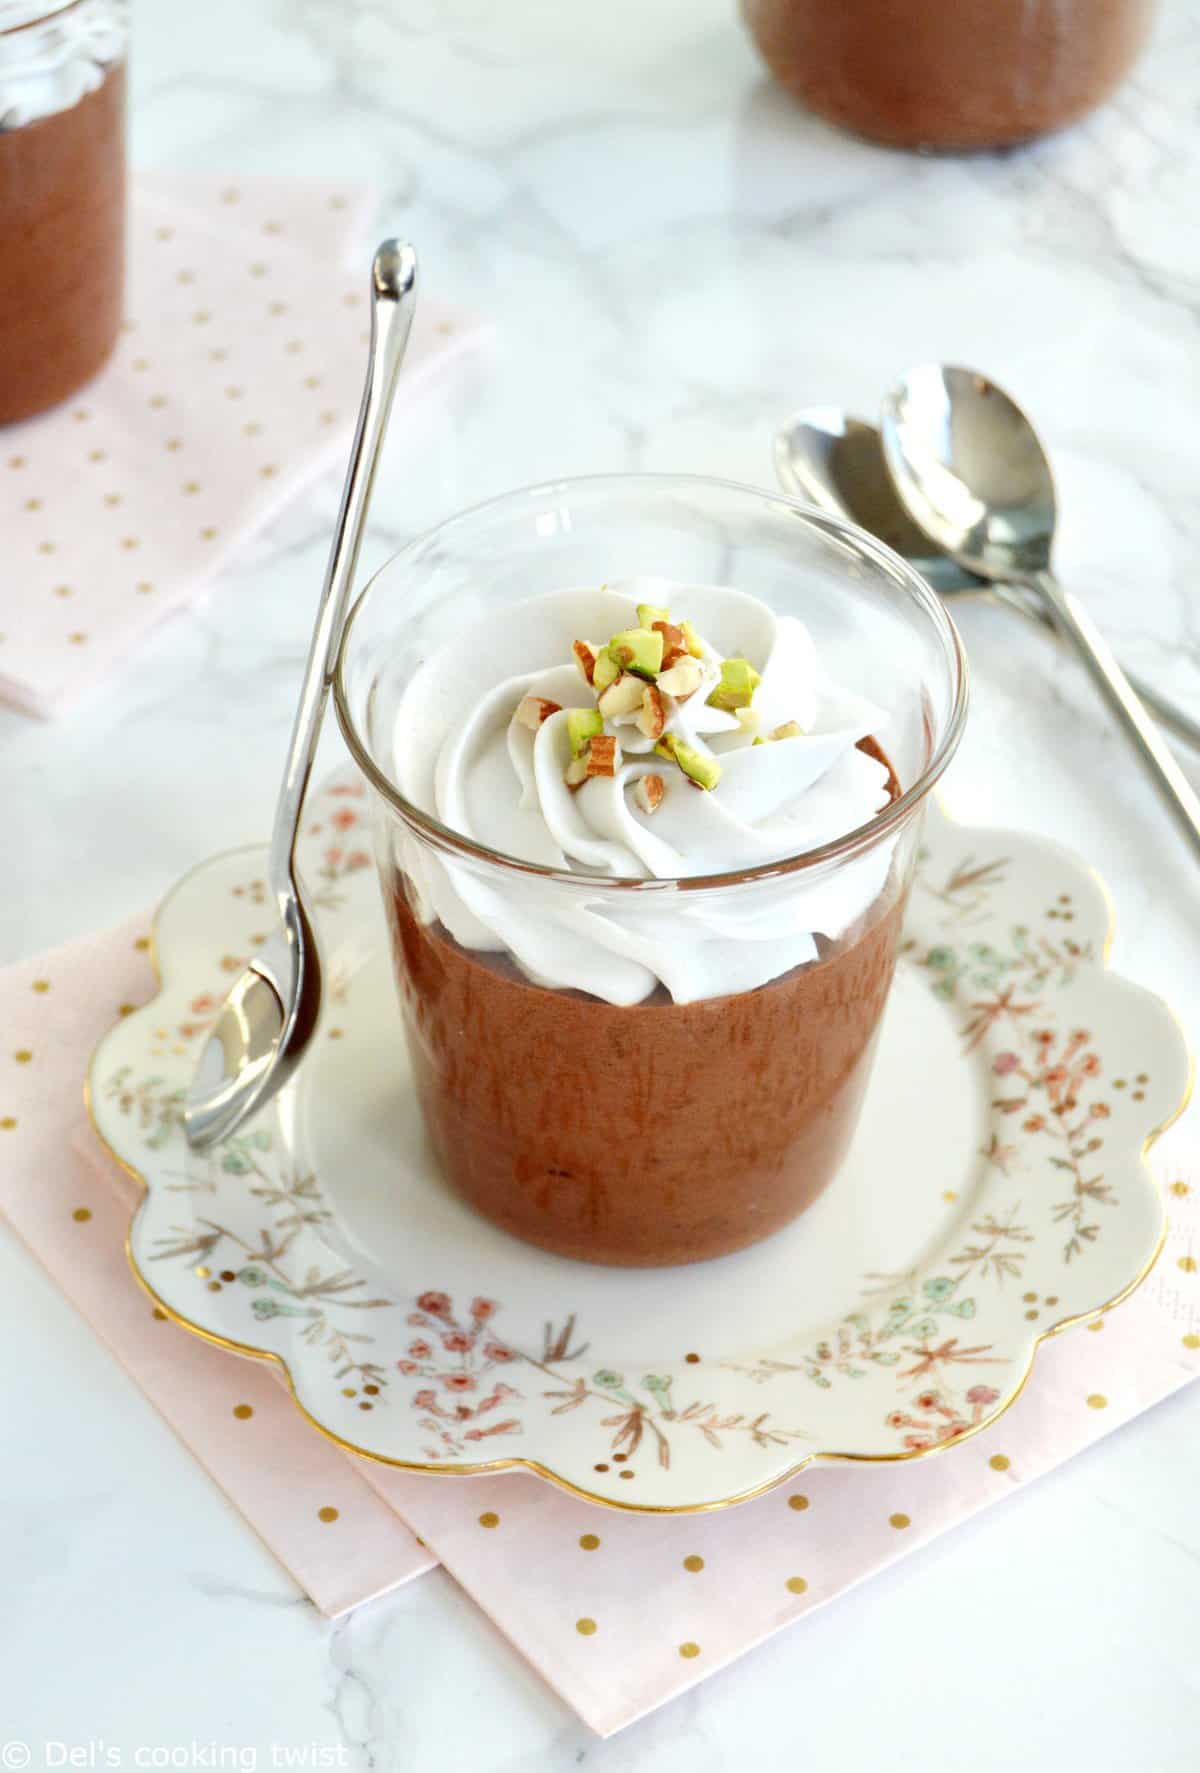 Vegan Chocolate Mousse with Whipped Coconut Cream